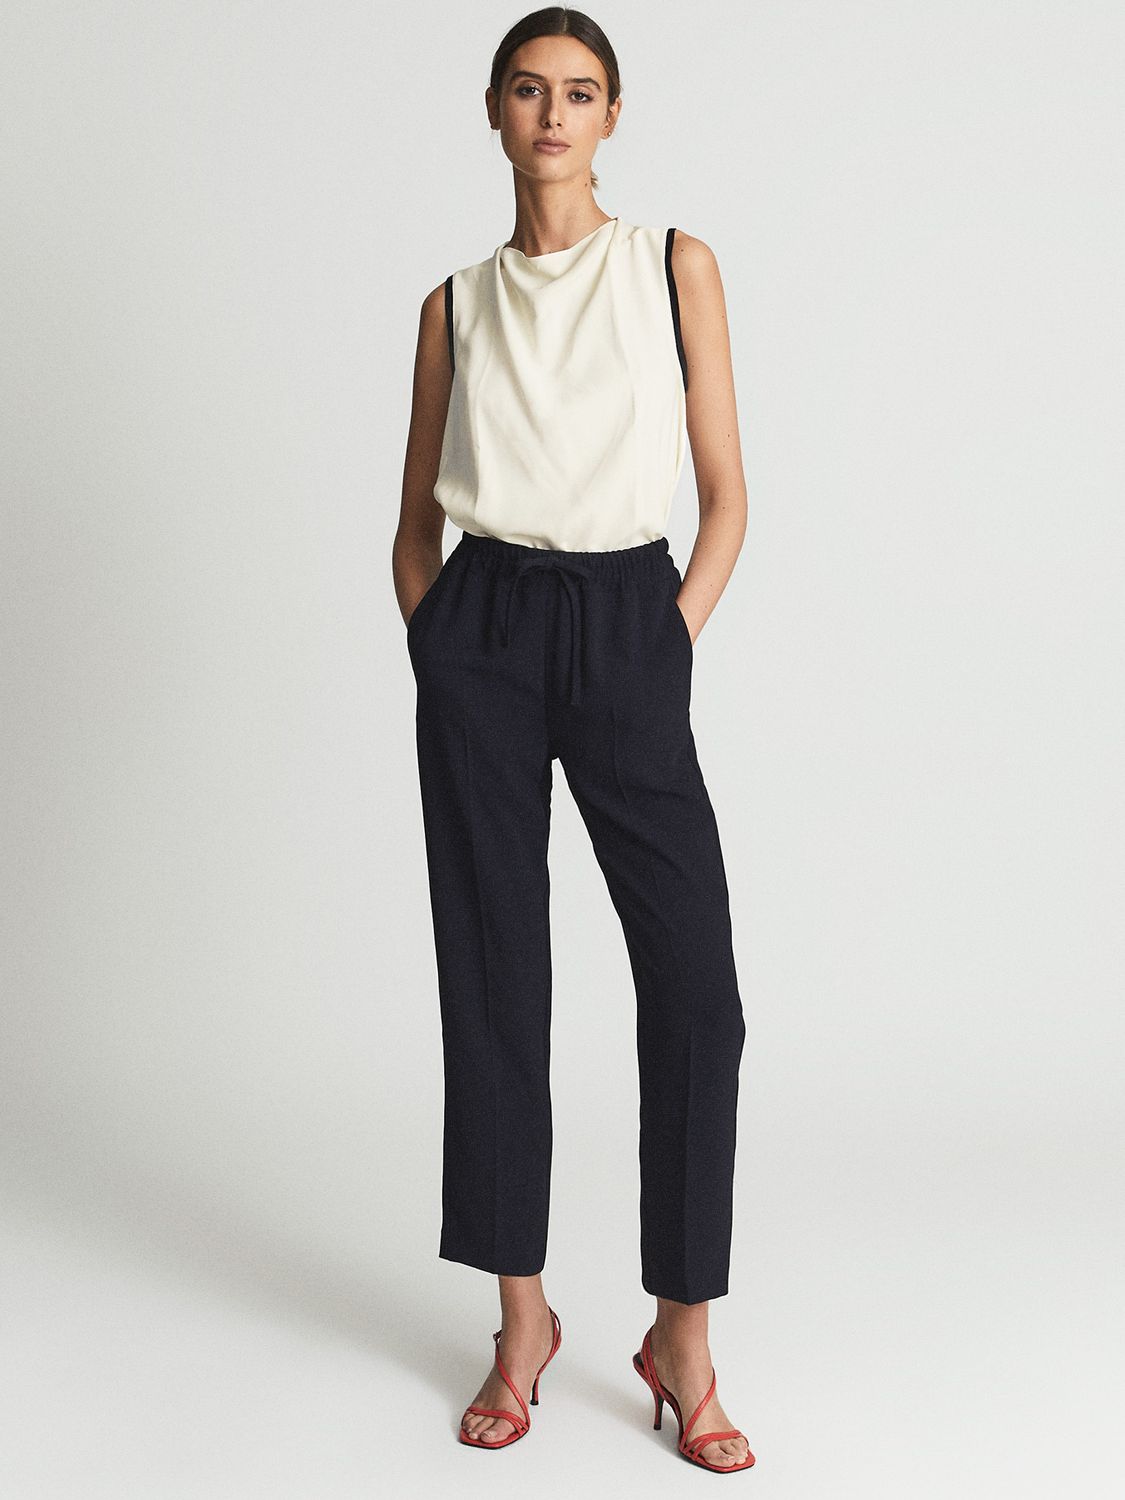 Reiss Hailey Cropped Trousers, Navy at John Lewis & Partners